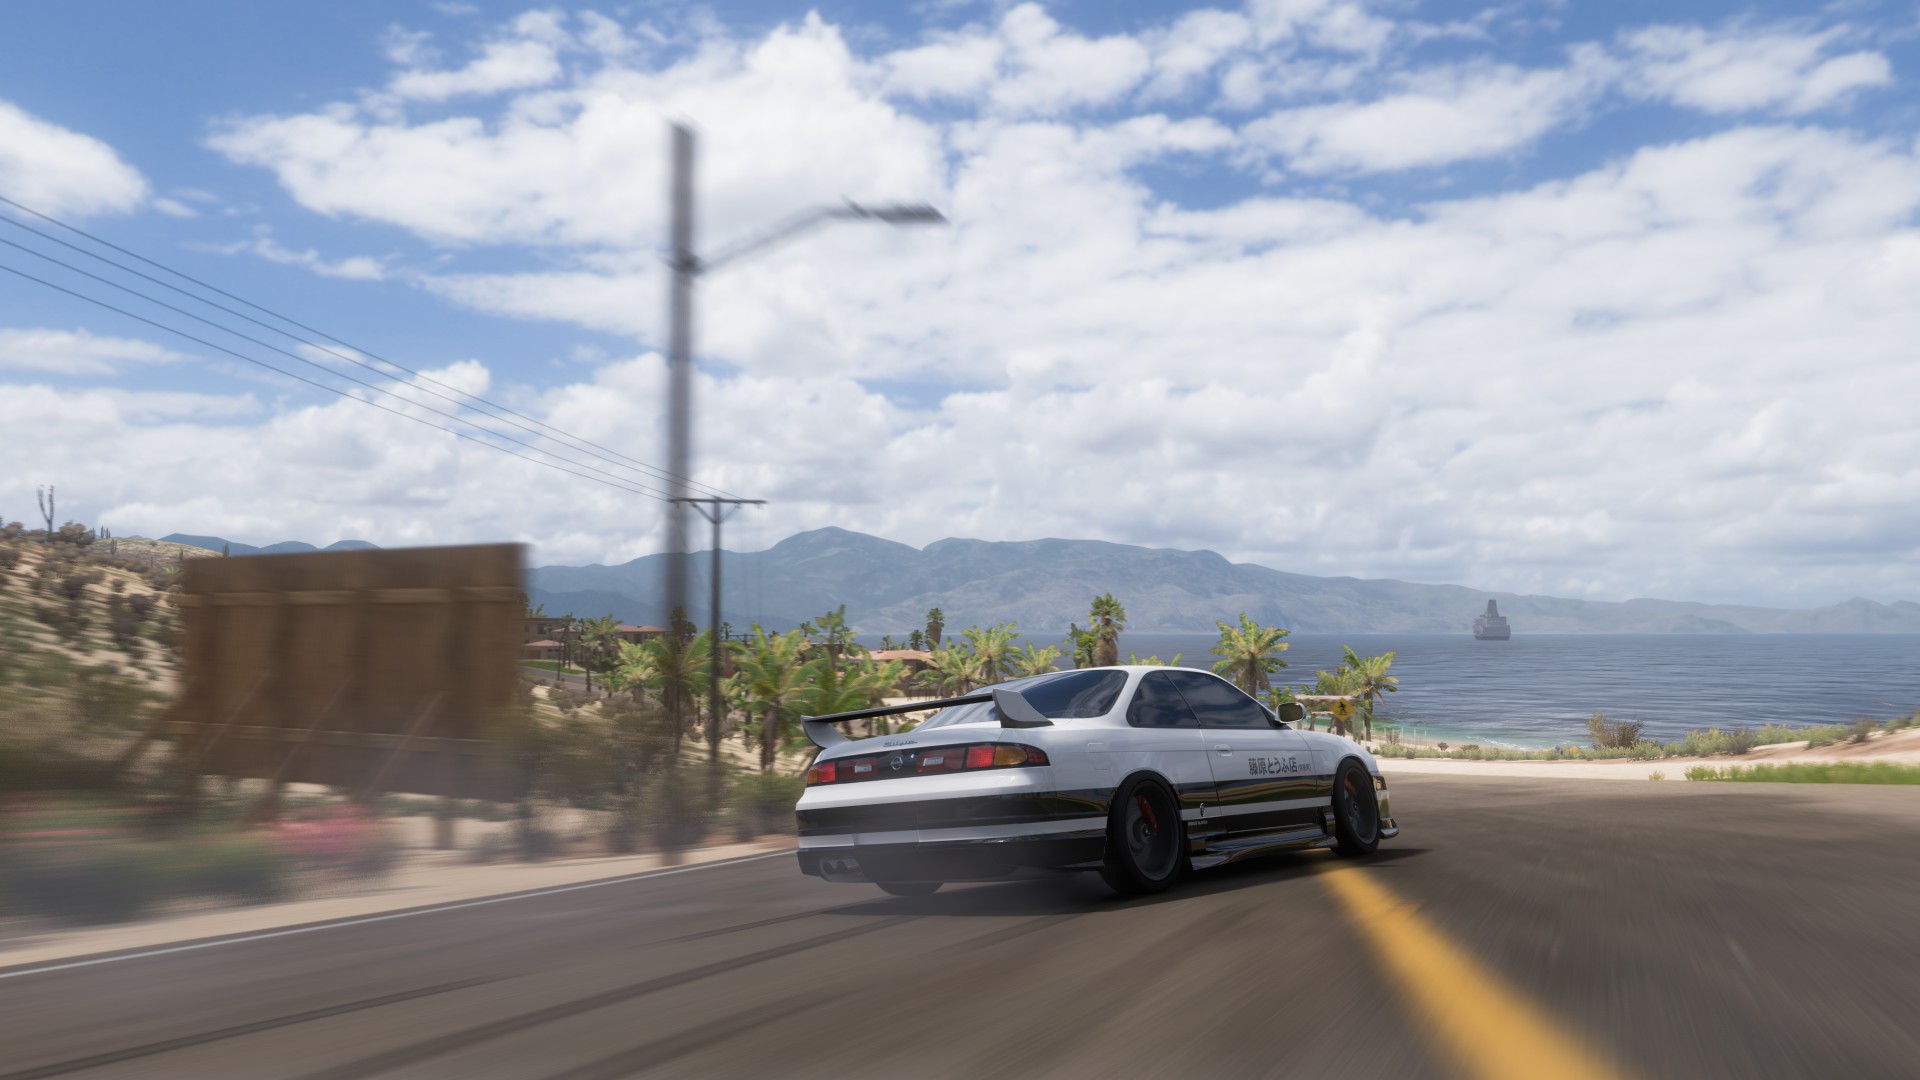 Initial D Nissan Silvia S14 Forza Horizon 5 Nissan Japanese Cars Video Games PlaygroundGames 1920x1080